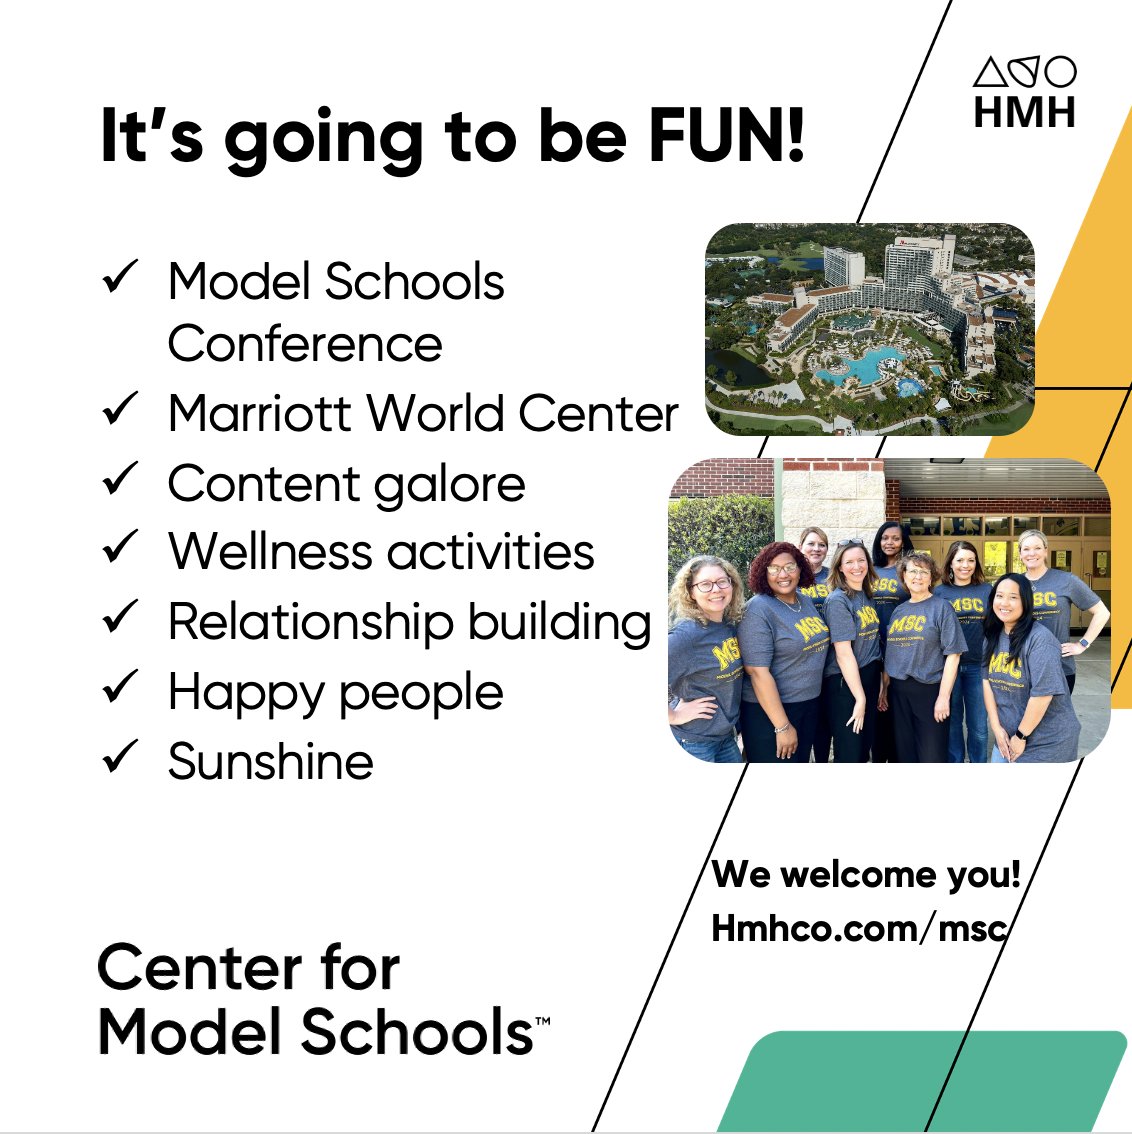 It's going to be SO MUCH FUN!! Get your school besties together and plan the BEST professional learning of the year! hmhco.com/msc #k12 #educators #fun #celebrate #teachers #leaders #learning #professionals